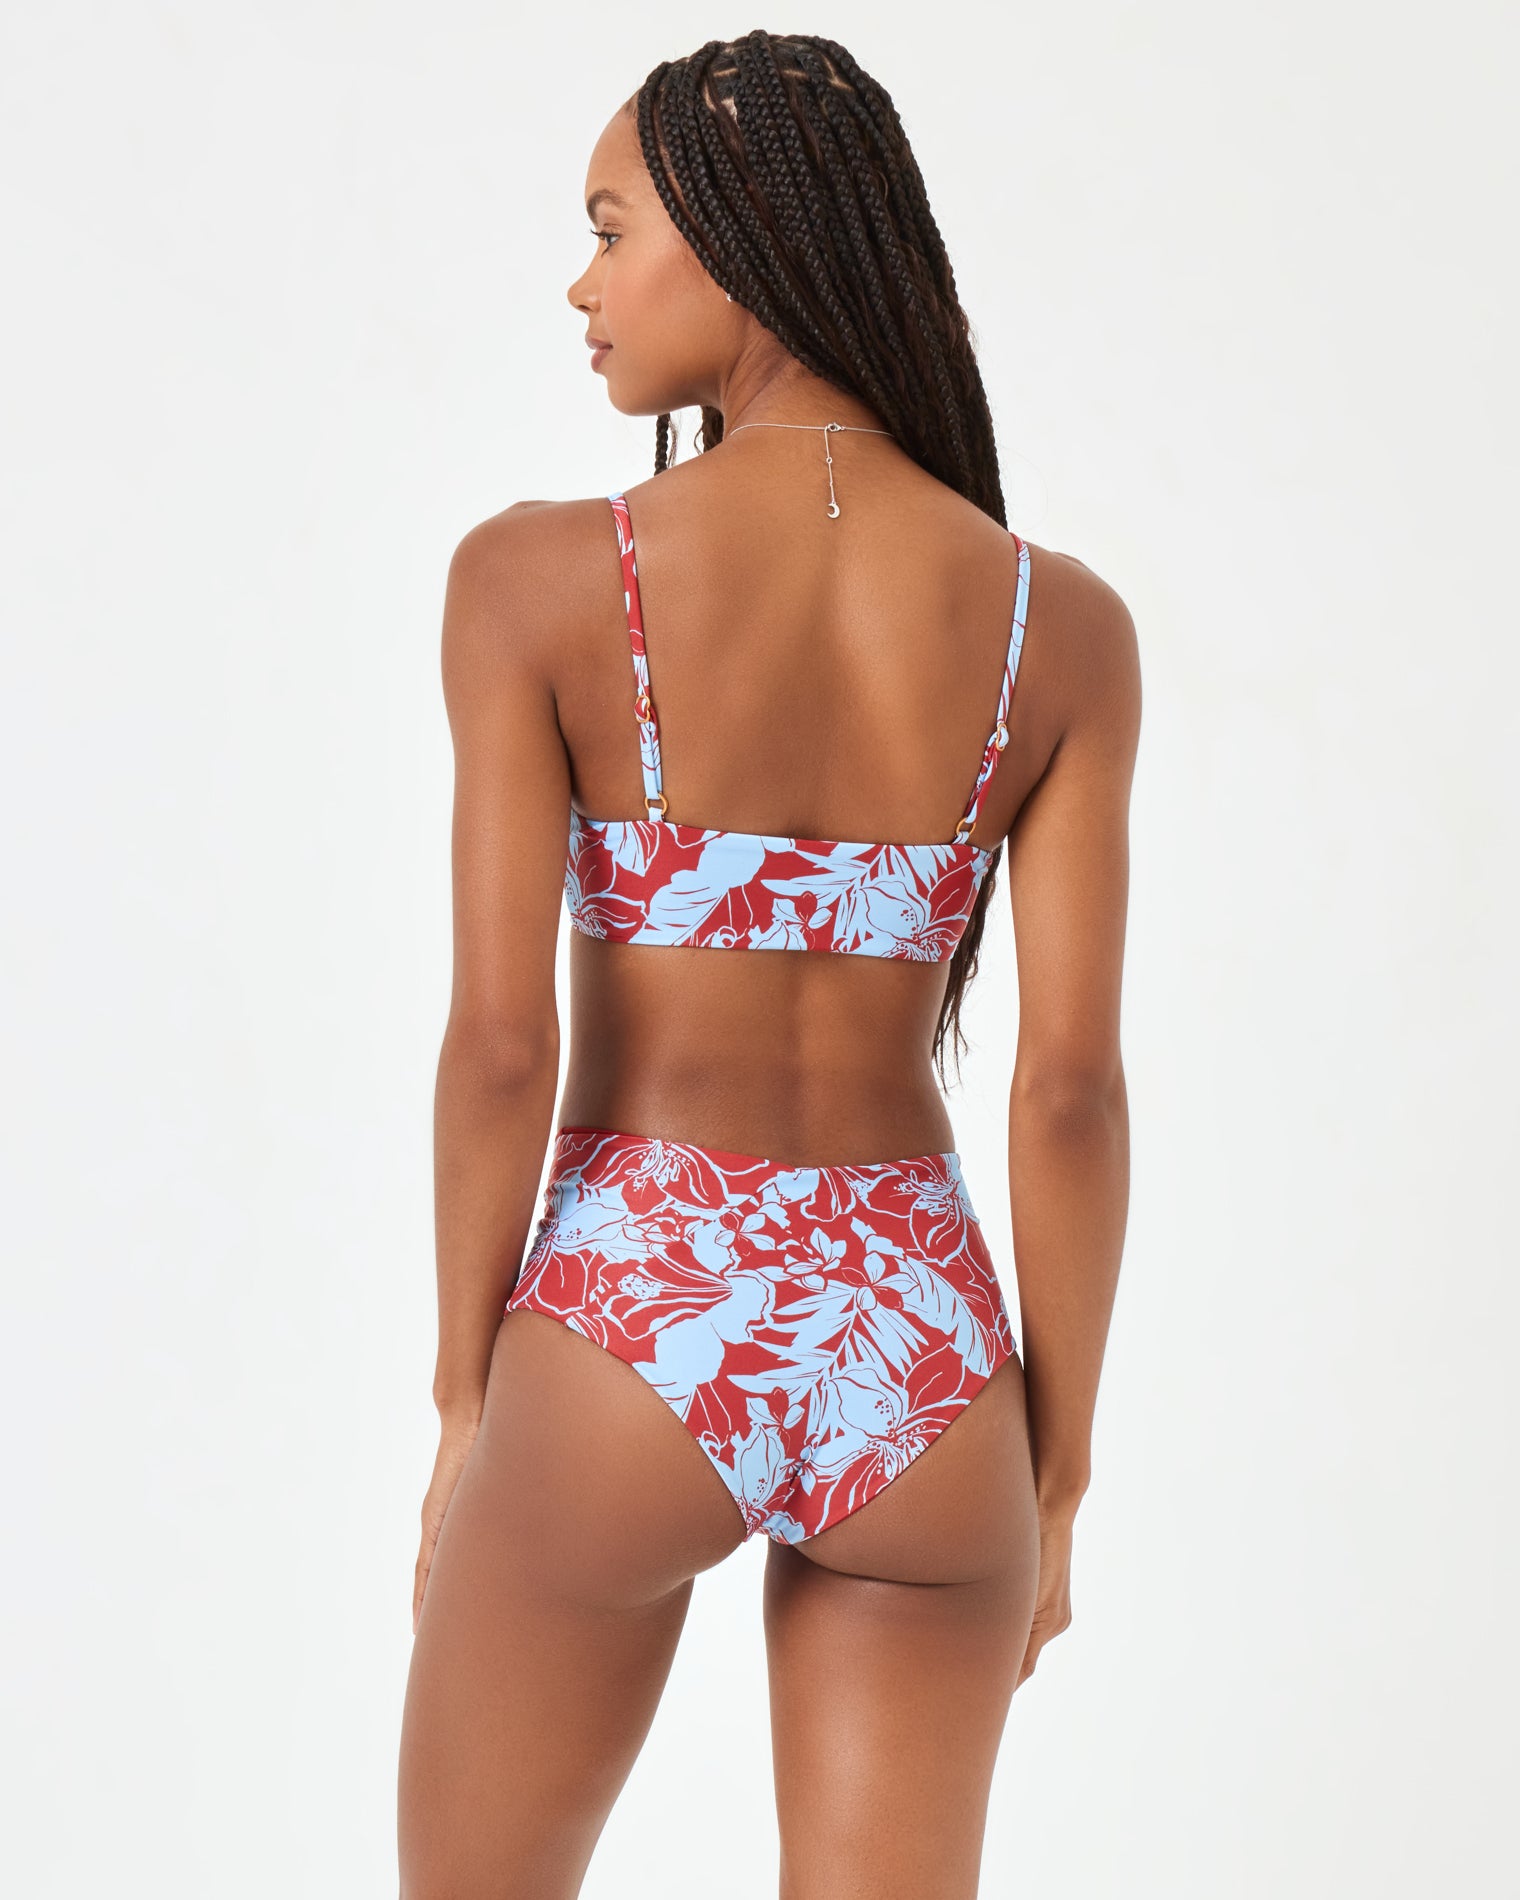 Eco Chic Econyl® High Tide Bikini Bottom - Going Tropical Going Tropical | Model: Taelor (size: S) | Hover